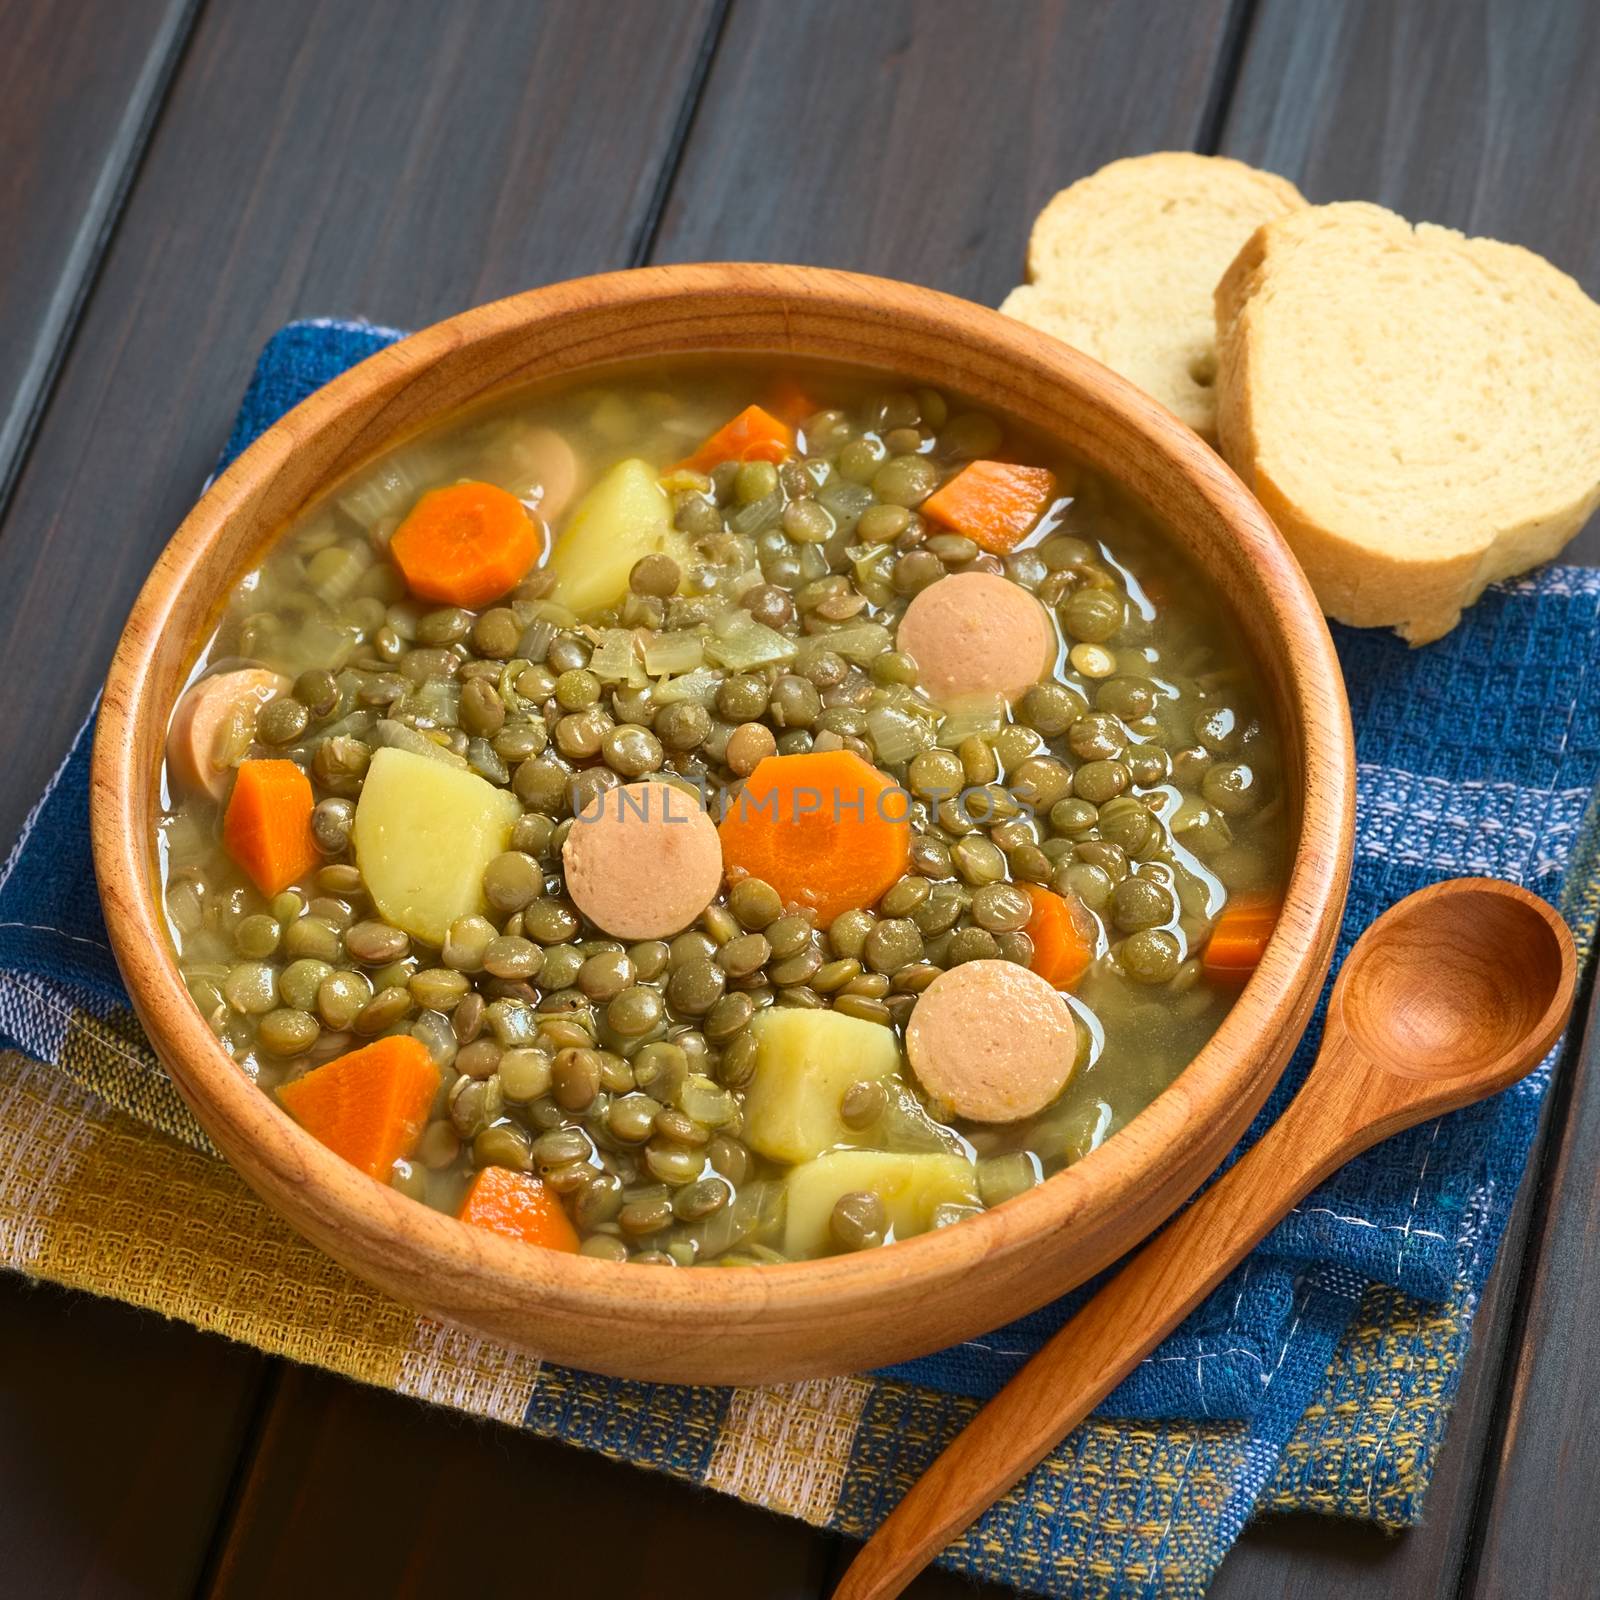 Wooden bowl of lentil soup made with potato, carrot, onion and sausage slices, photographed on dark wood with natural light (Selective Focus, Focus on the middle of the soup)